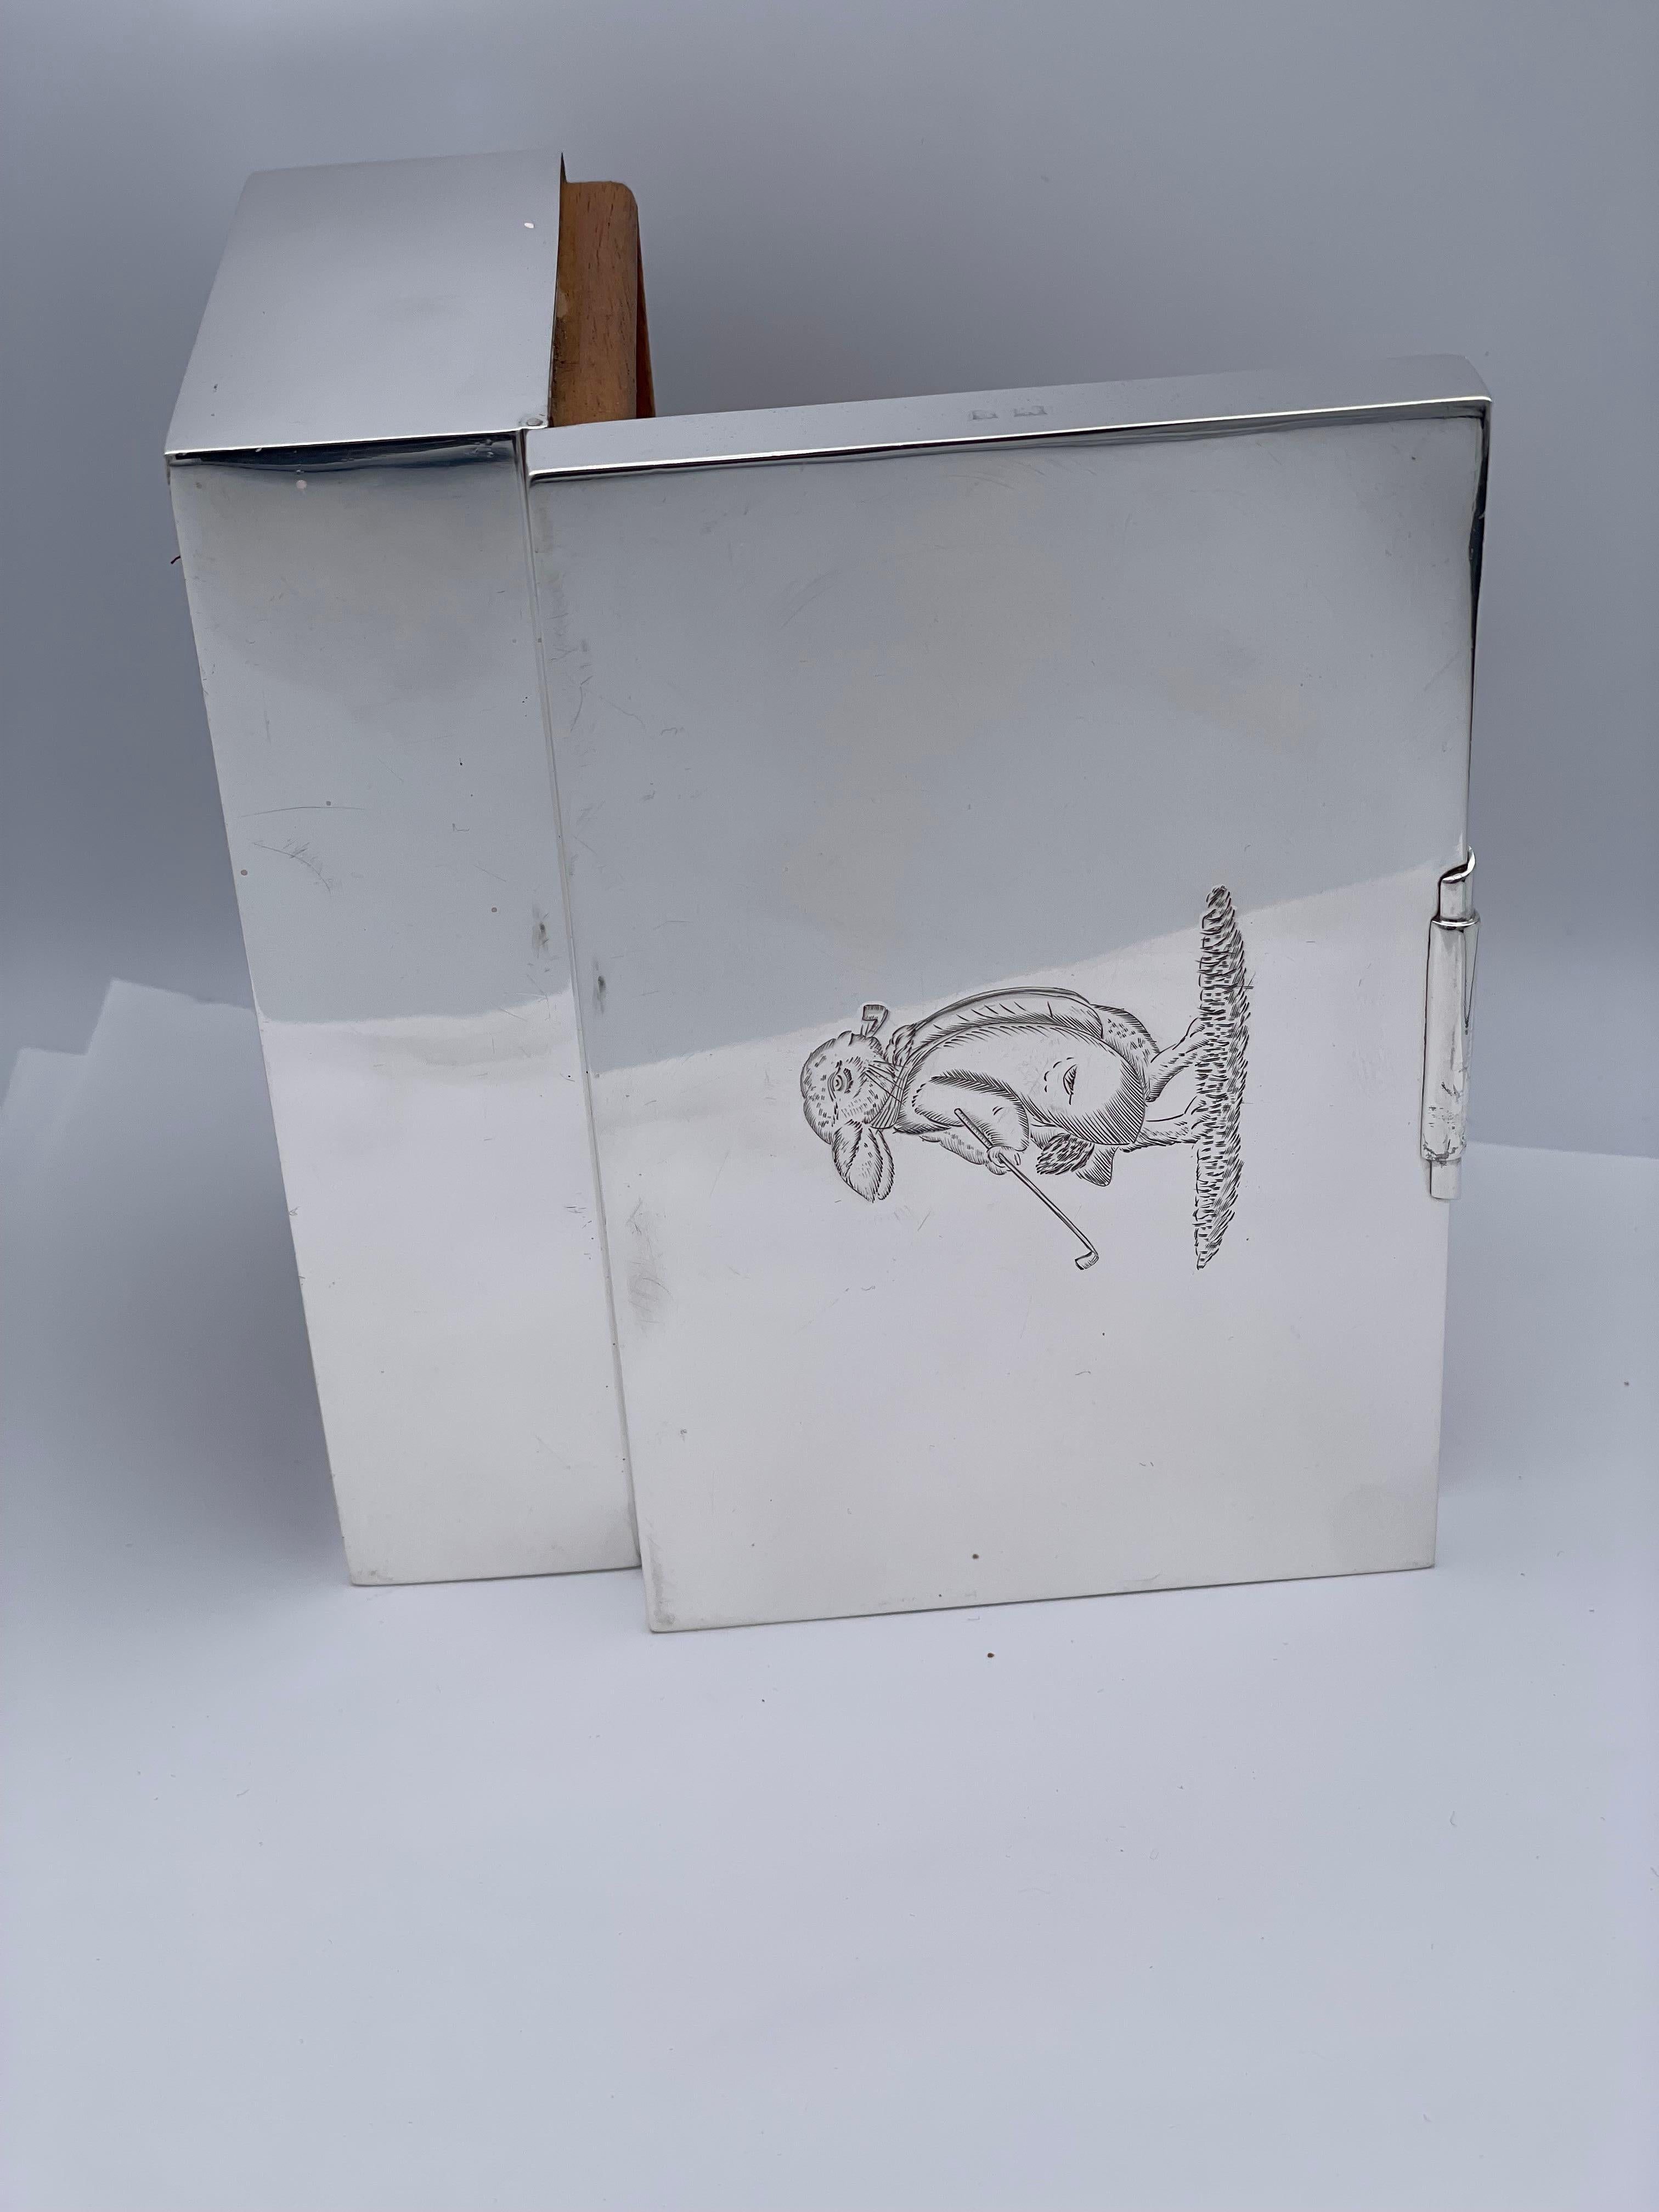 A fabulous one-of-a-kind:  a hinged box with an engraved rabbit, wearing a smoking jacket, holding a golf club and smoking a cigar.  Solid gauge sterling silver.  Made in Birmingham.  3 1/2